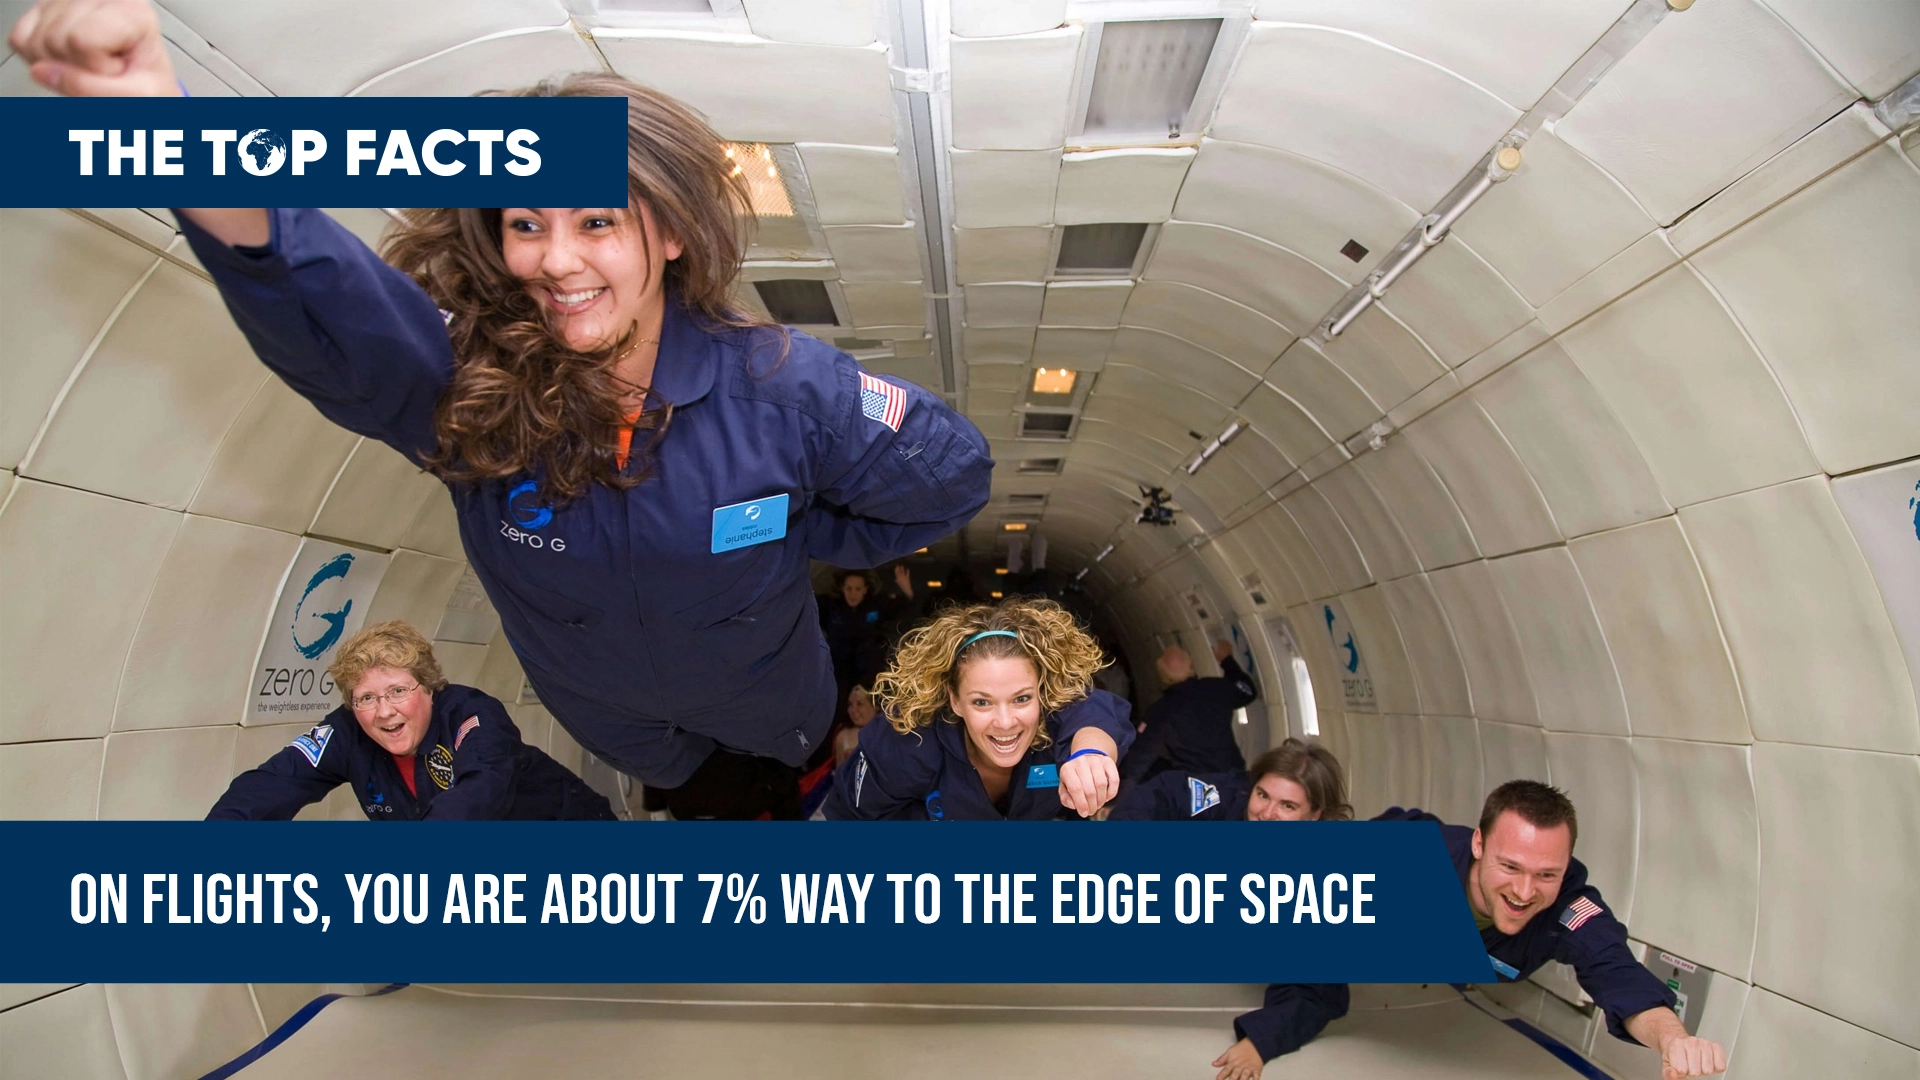 On flights, you are about 7% way to the edge of space